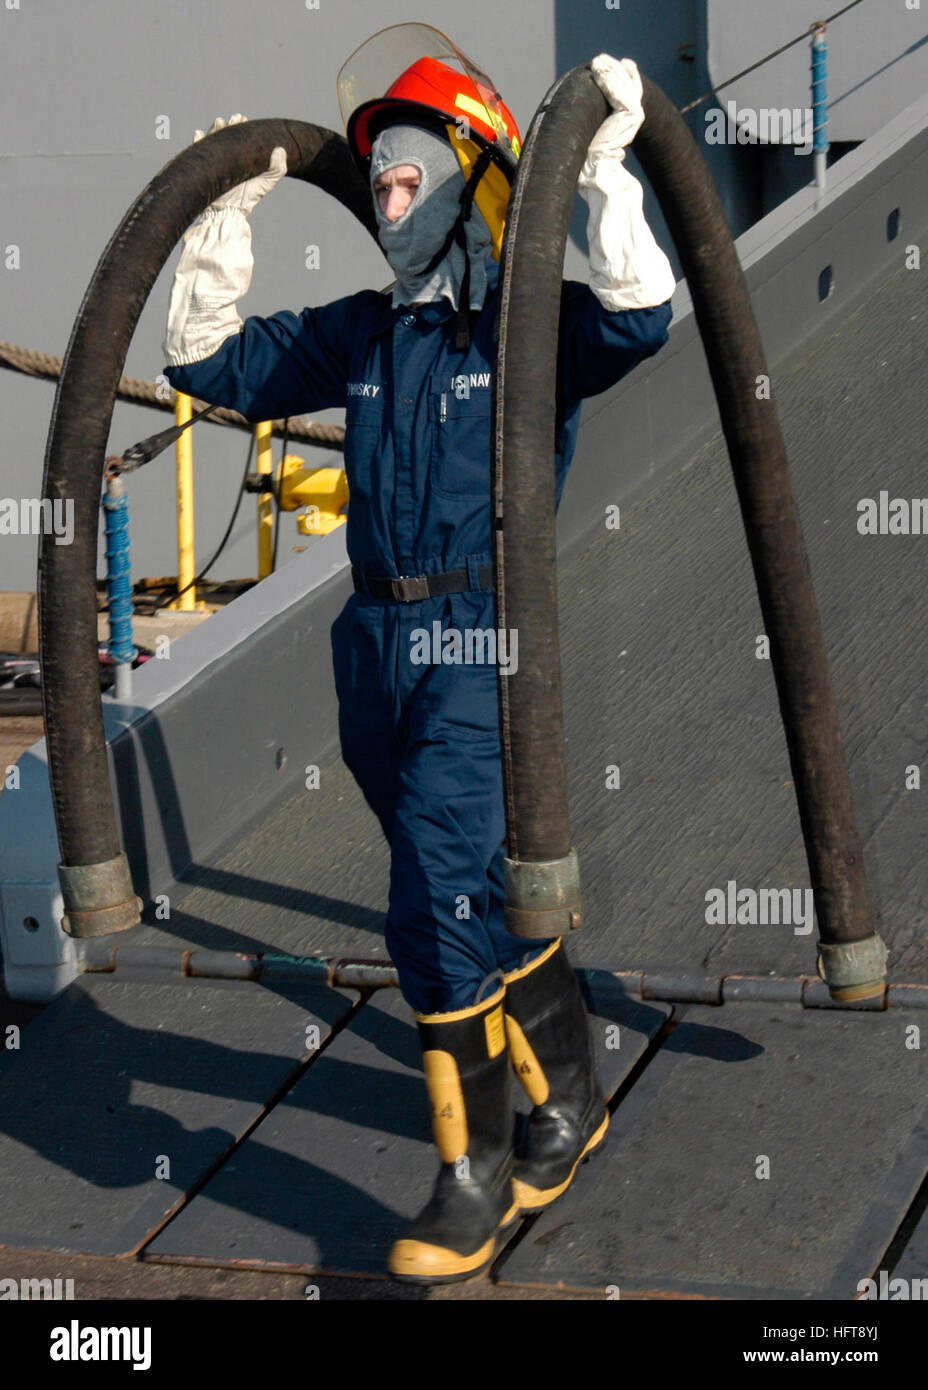 061101-N-7292N-005 Norfolk, Va. (Nov. 1, 2006) - Damage Controlman Fireman John Bukovinsky carries two non-collapsible hard rubber suction hoses during damage control competition events held onboard the amphibious assault ship USS Kearsarge (LHD 3) in support of Surface Line Week. U.S. Navy photo by Mass Communication Specialist 3rd Class Christen R. Nicholas (RELEASED) US Navy 061101-N-7292N-005 Damage Controlman Fireman John Bukovinsky carries two non-collapsible hard rubber suction hoses during damage control competition Stock Photo